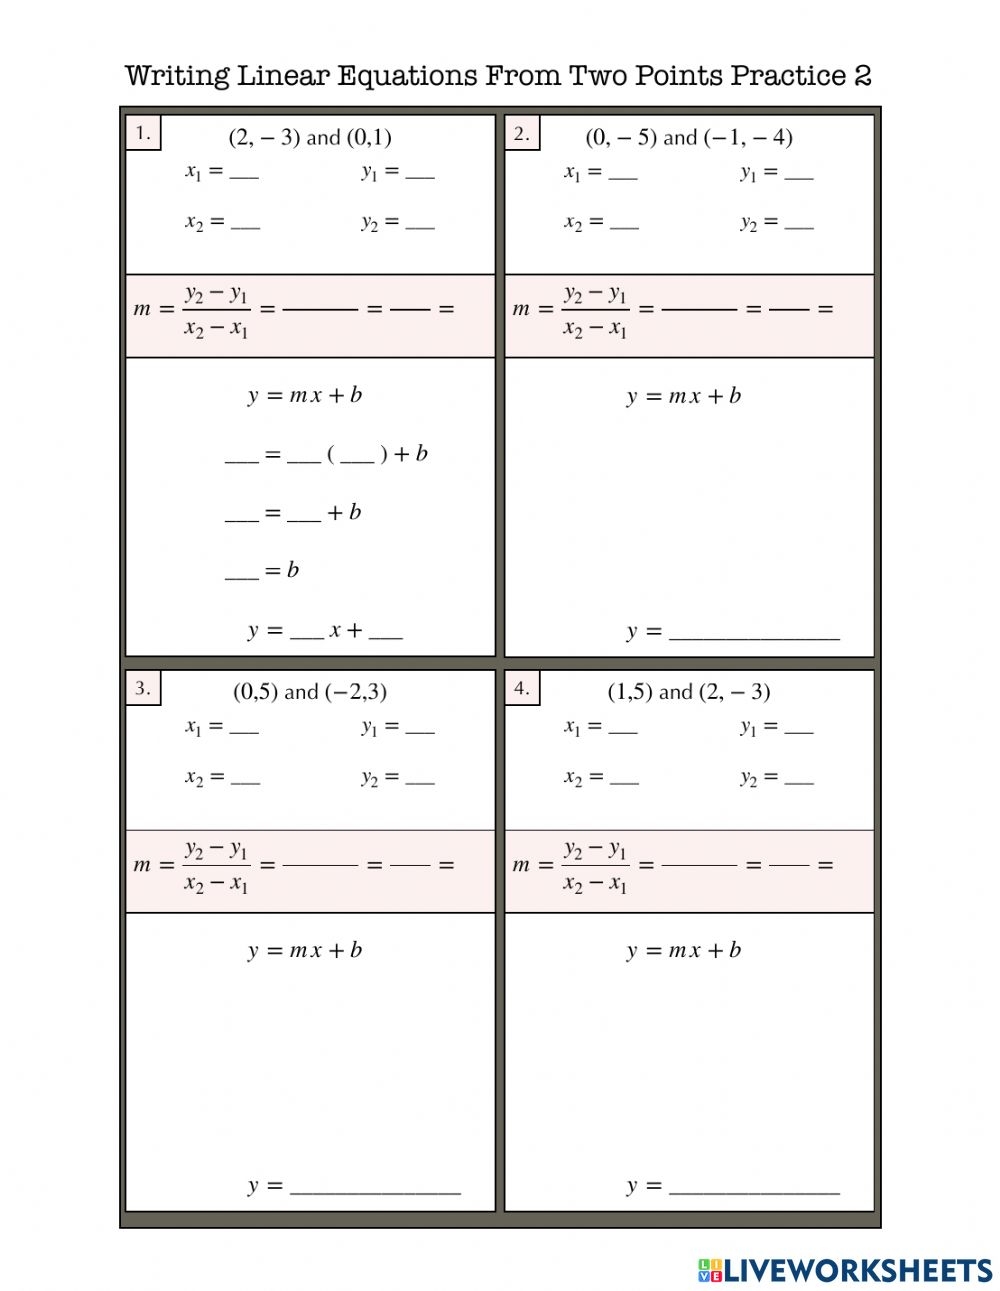 Writing Linear Equations From Two Points Practice 2 Worksheet